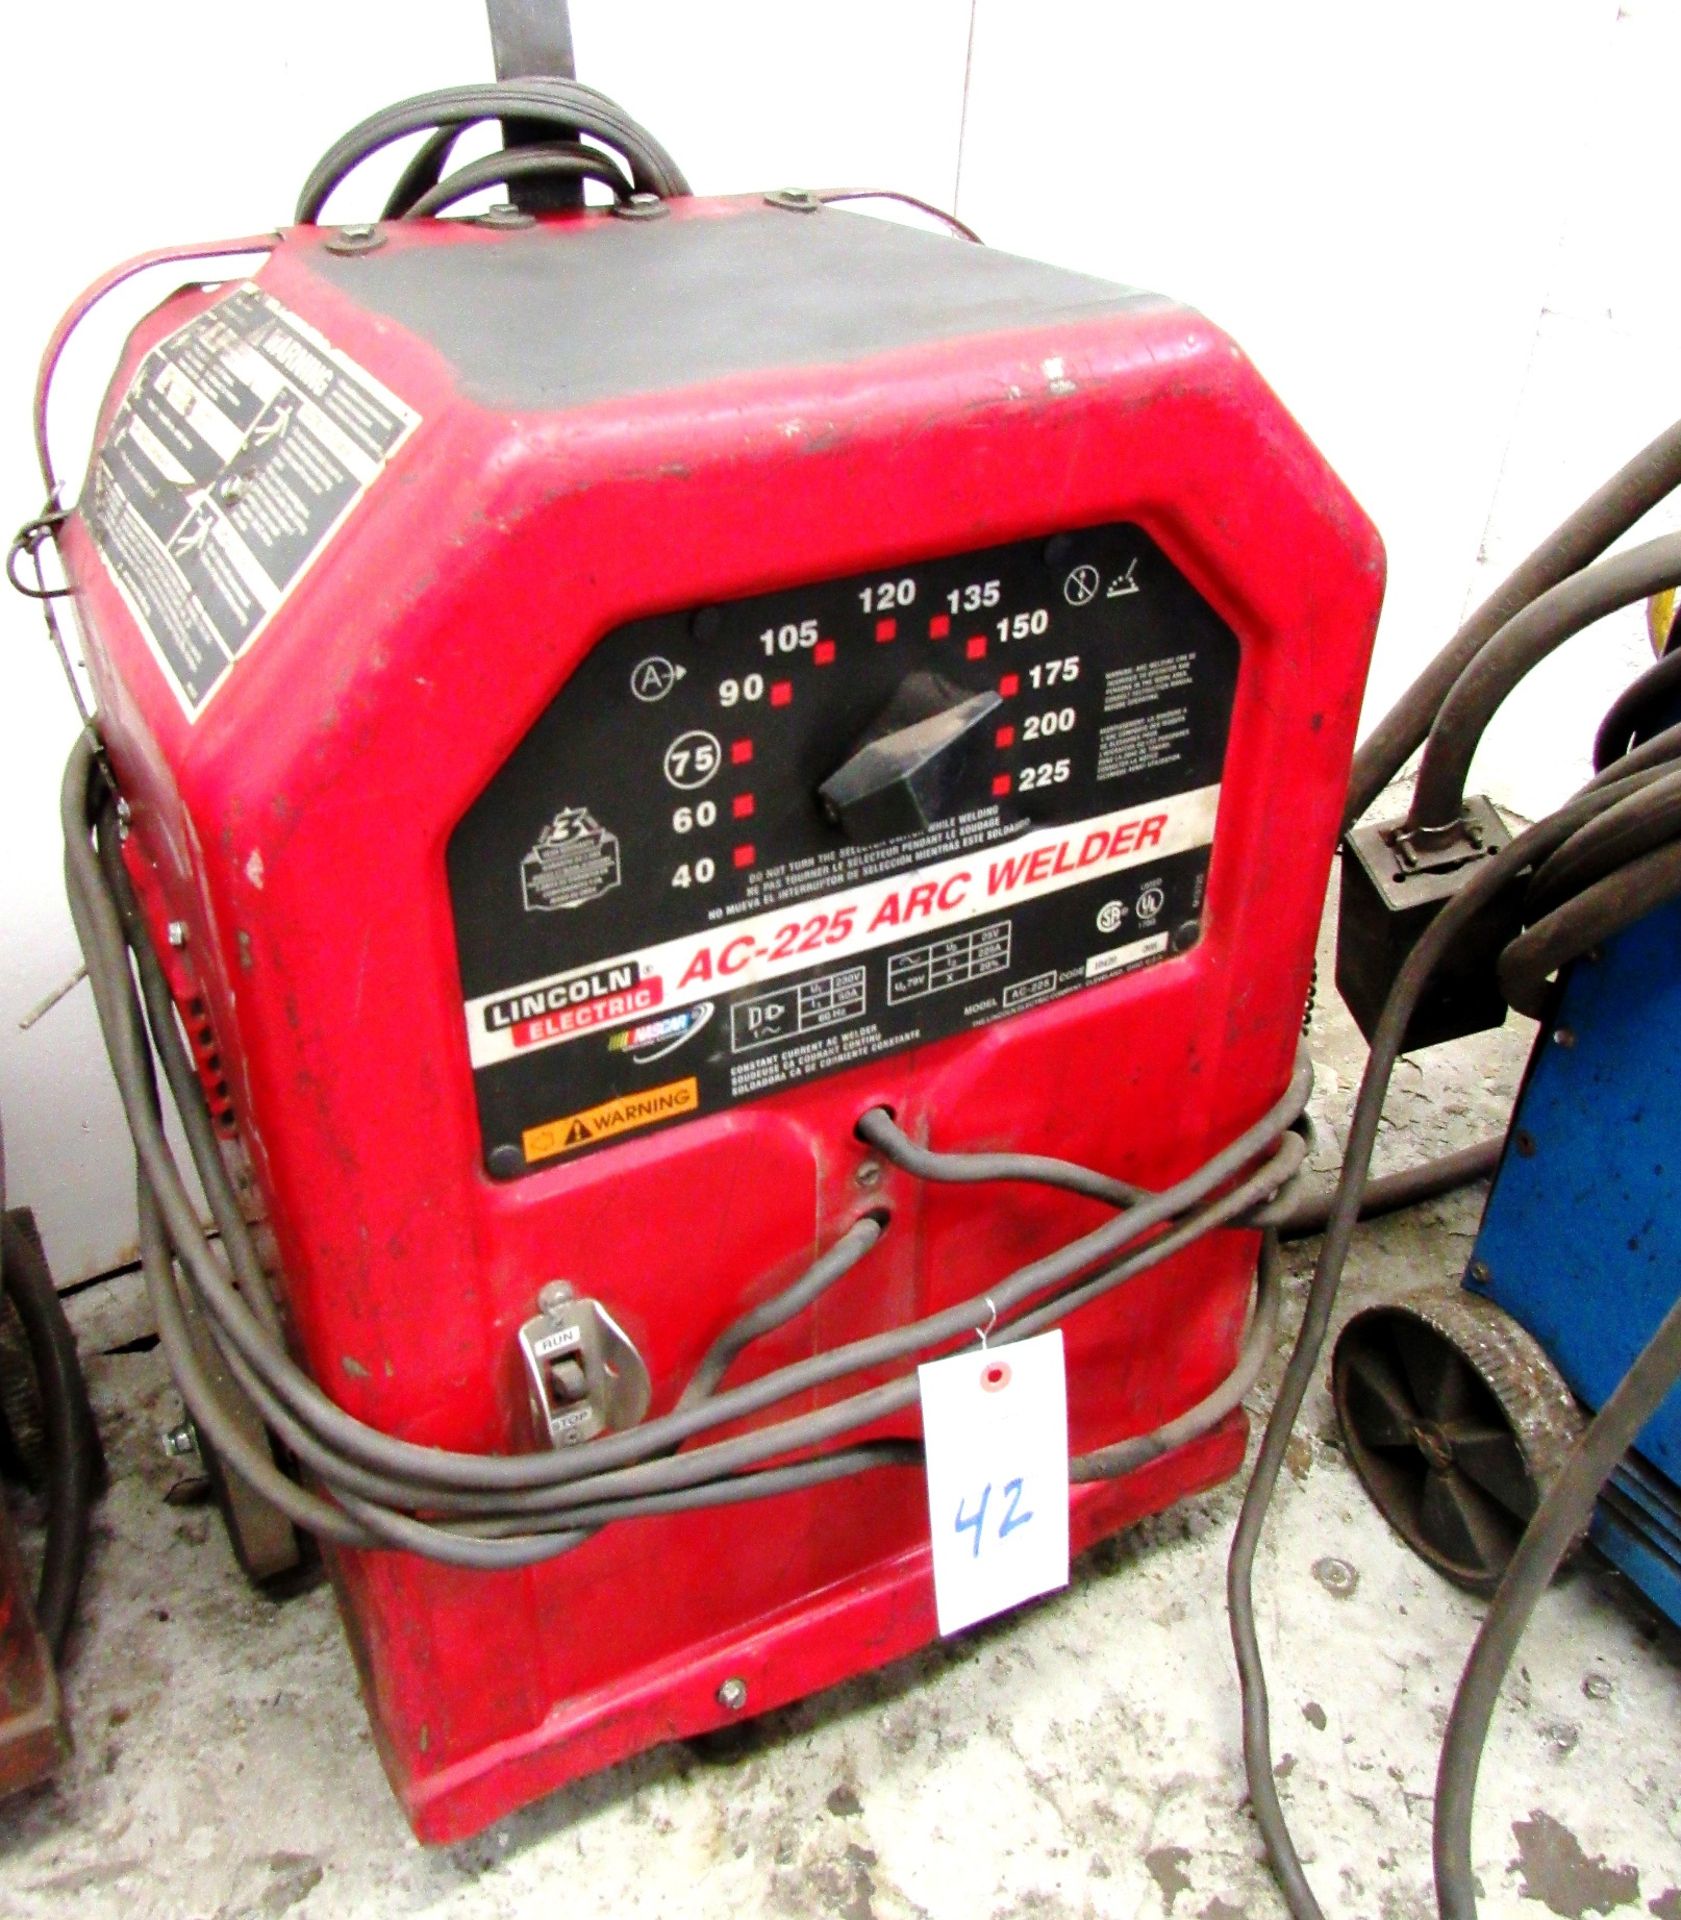 Lincoln Idealarc 225 AC/DC Welder - W/ Cables, Clamps